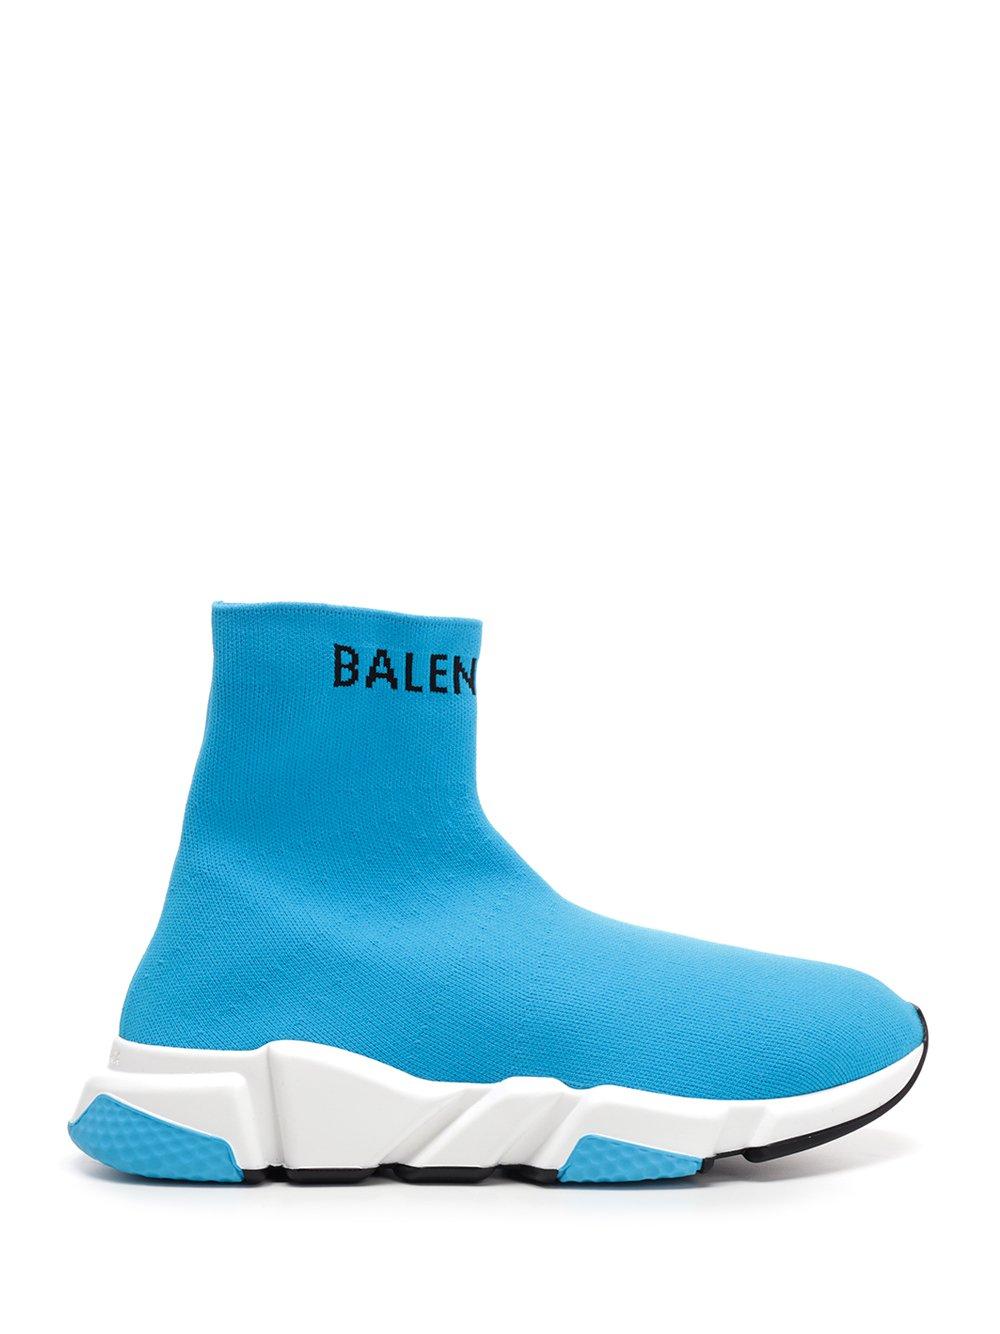 Balenciaga Synthetic Speed Sock Sneakers in Light Blue (Blue) for Men ...